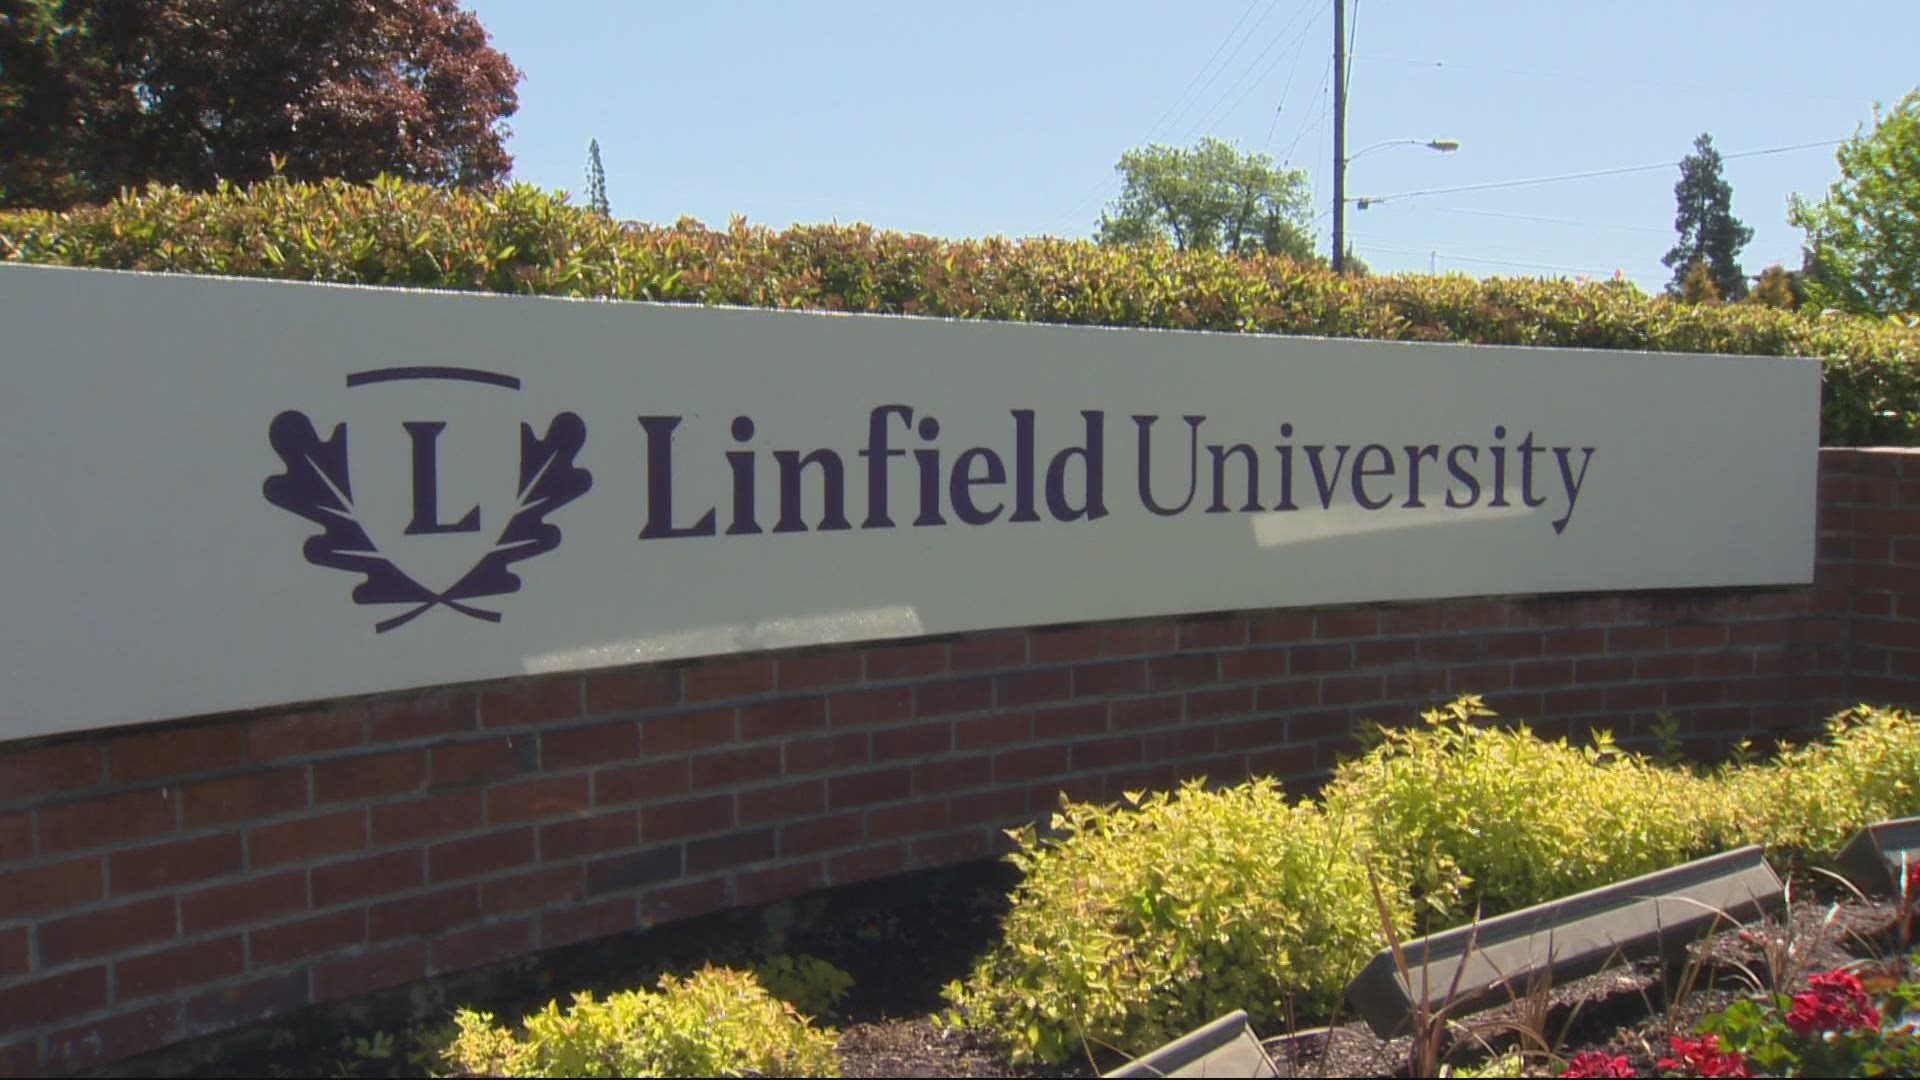 Linfield, a private university in McMinnville, is home to less than 2,000 students and more recently, a slew of disturbing headlines.